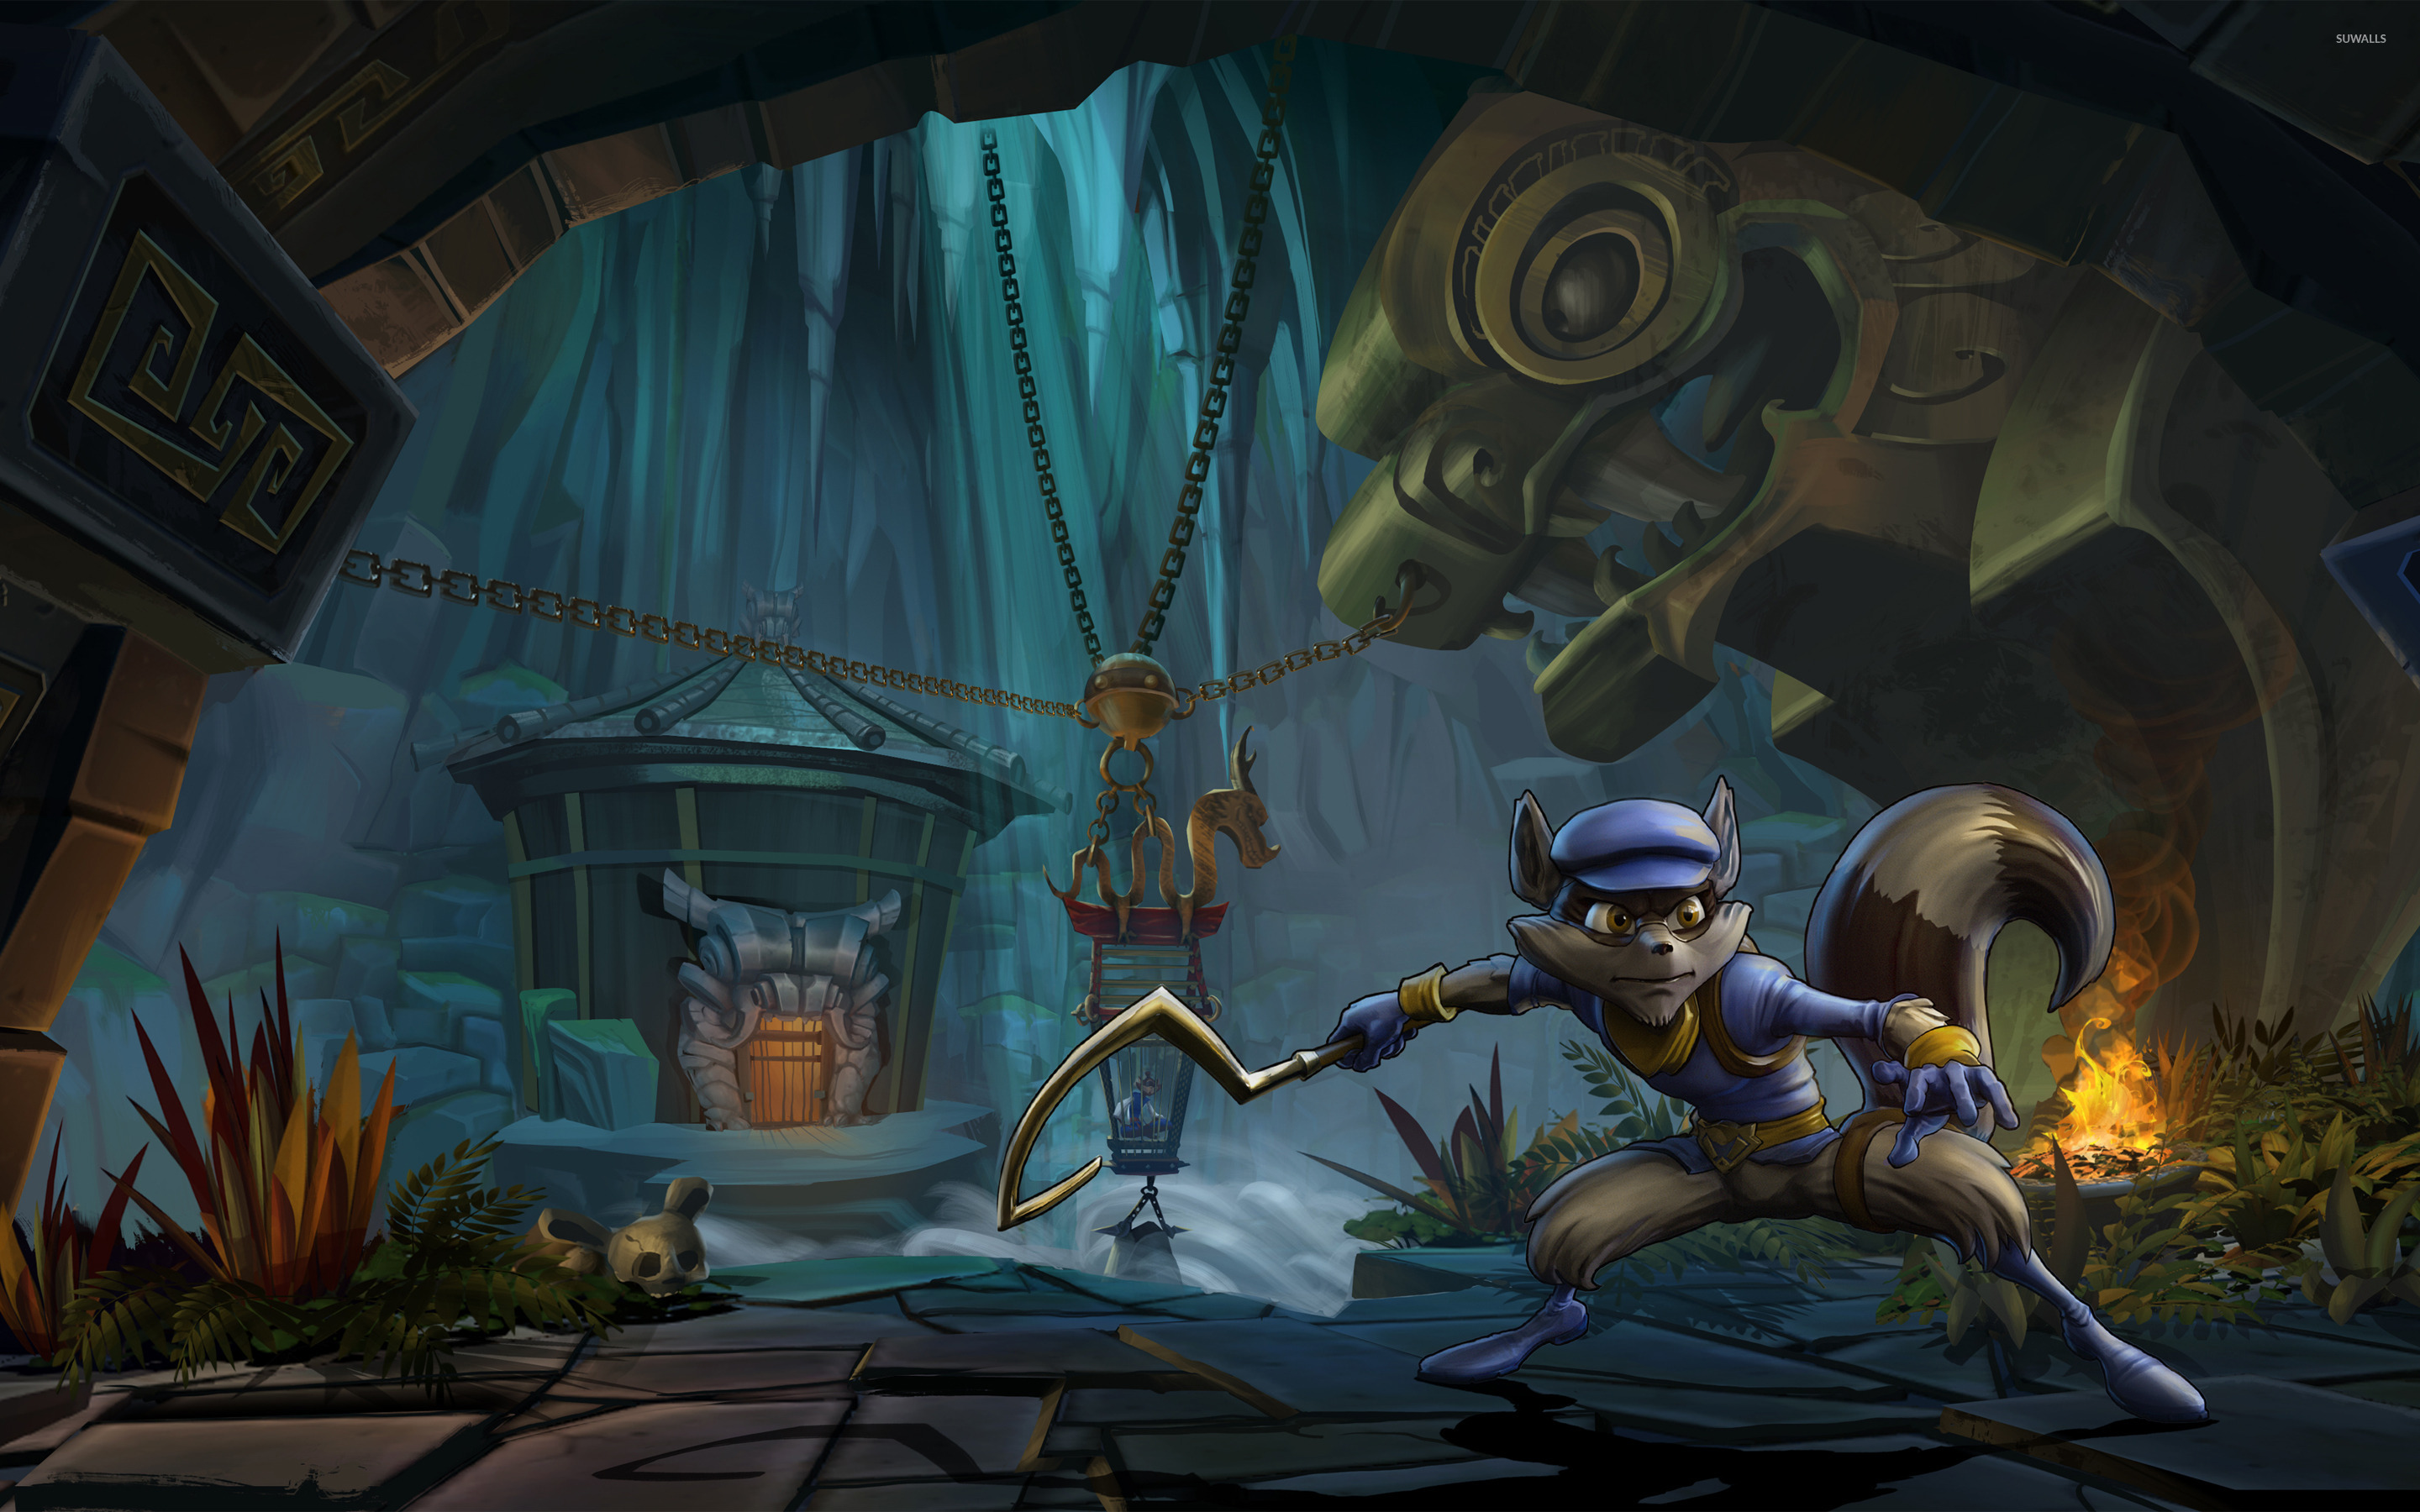 sly-cooper-thieves-in-time-2-wallpaper-game-wallpapers-17255